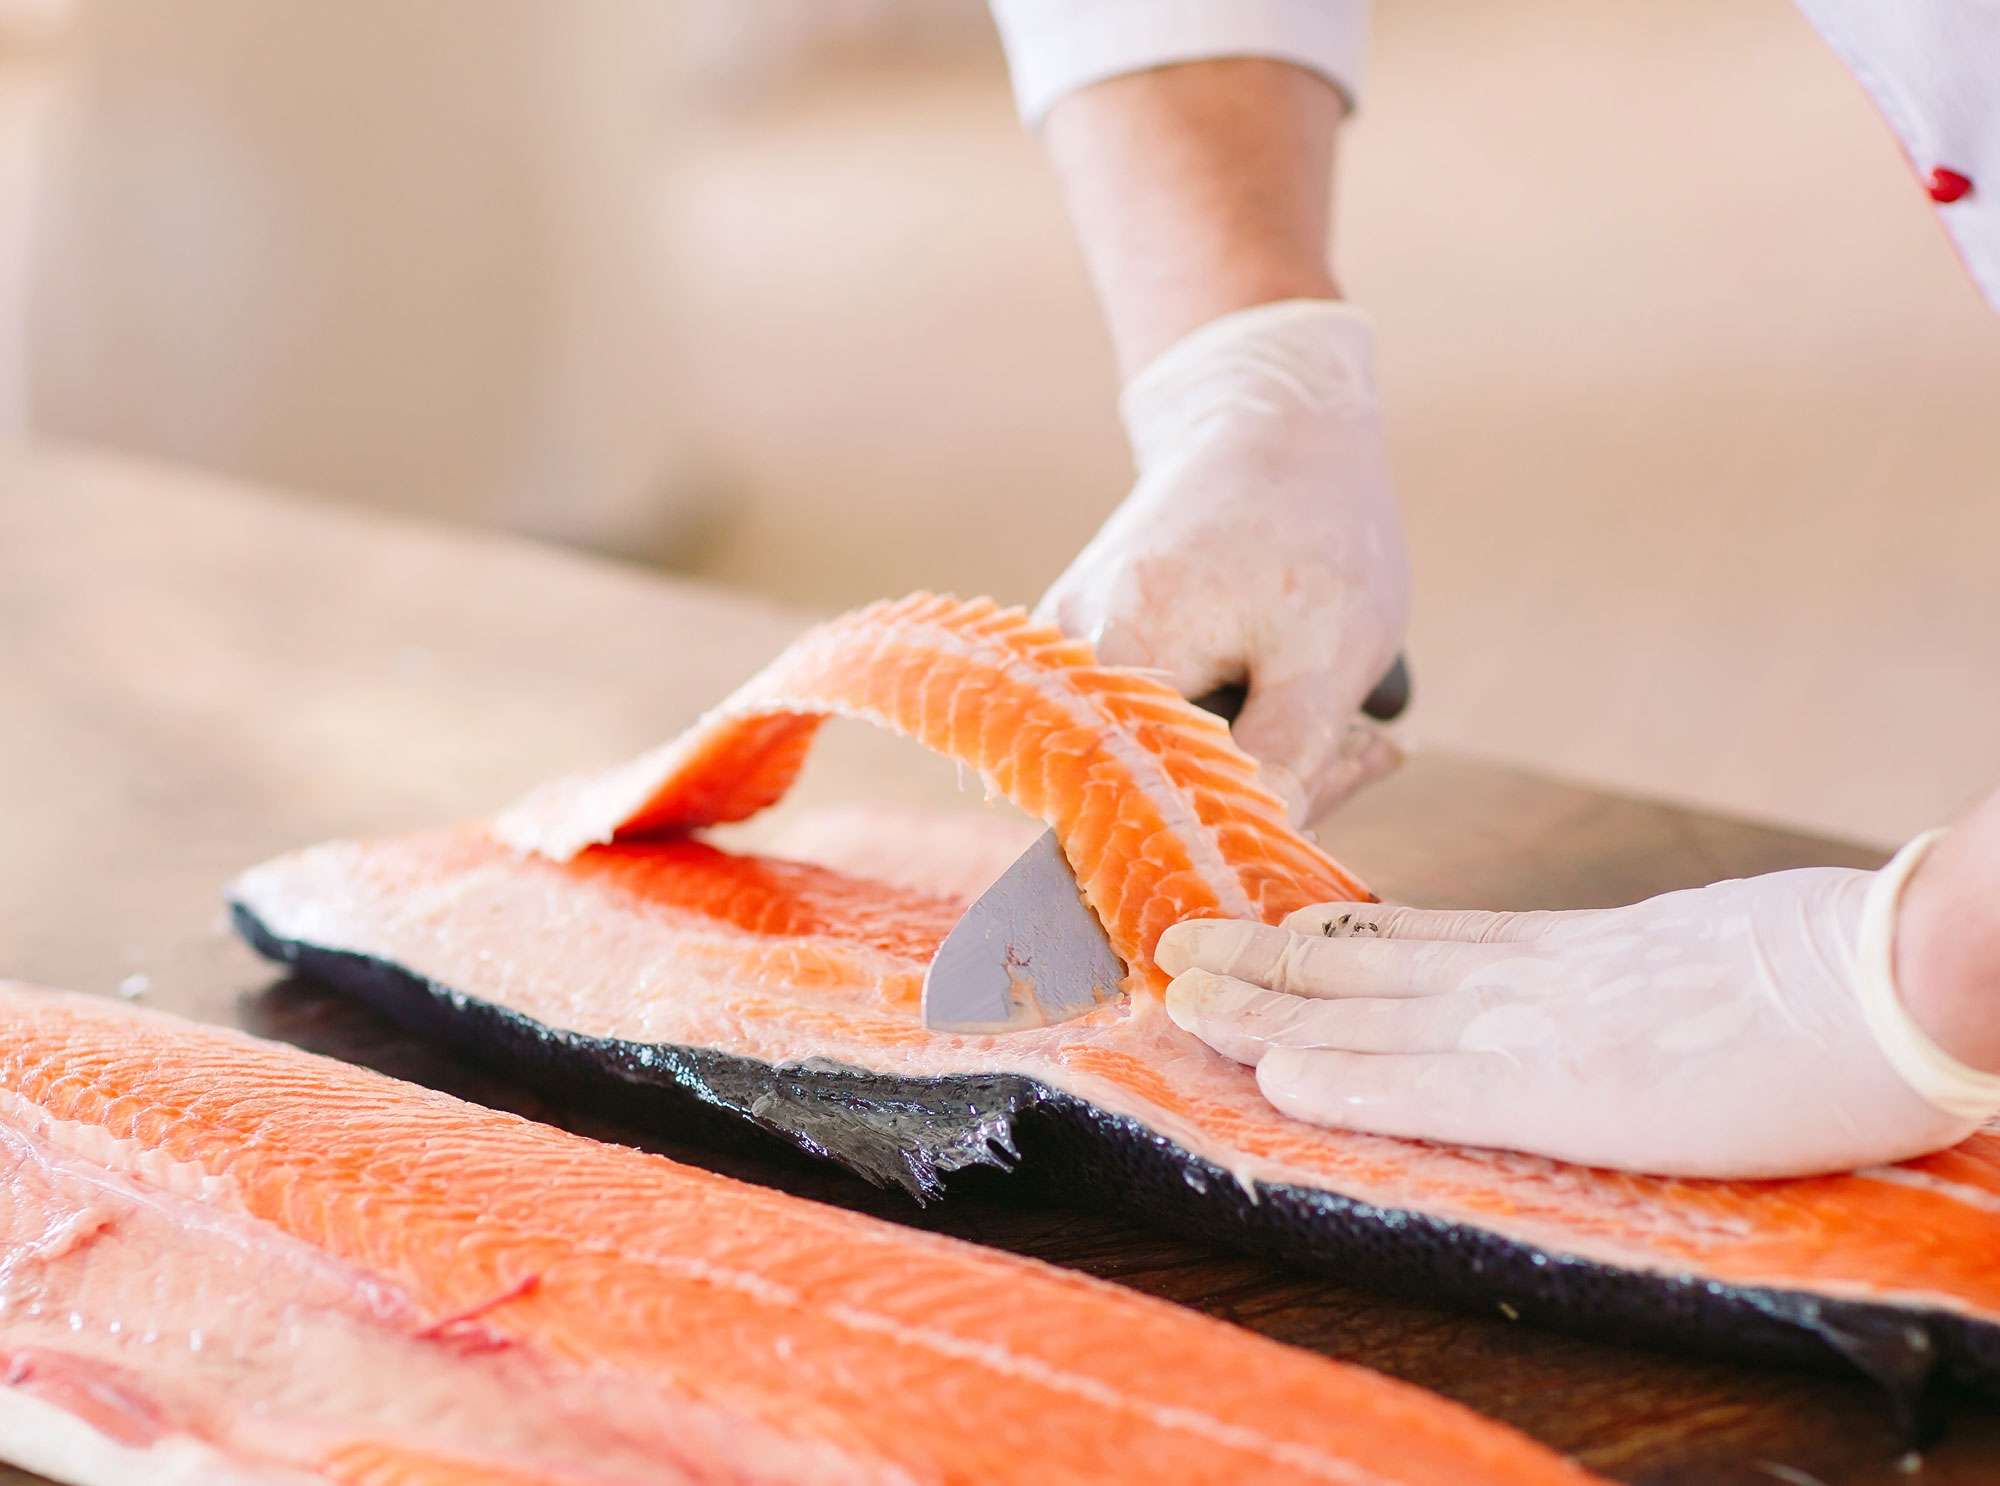 A close up of gloved hands deboning raw salmon fillet